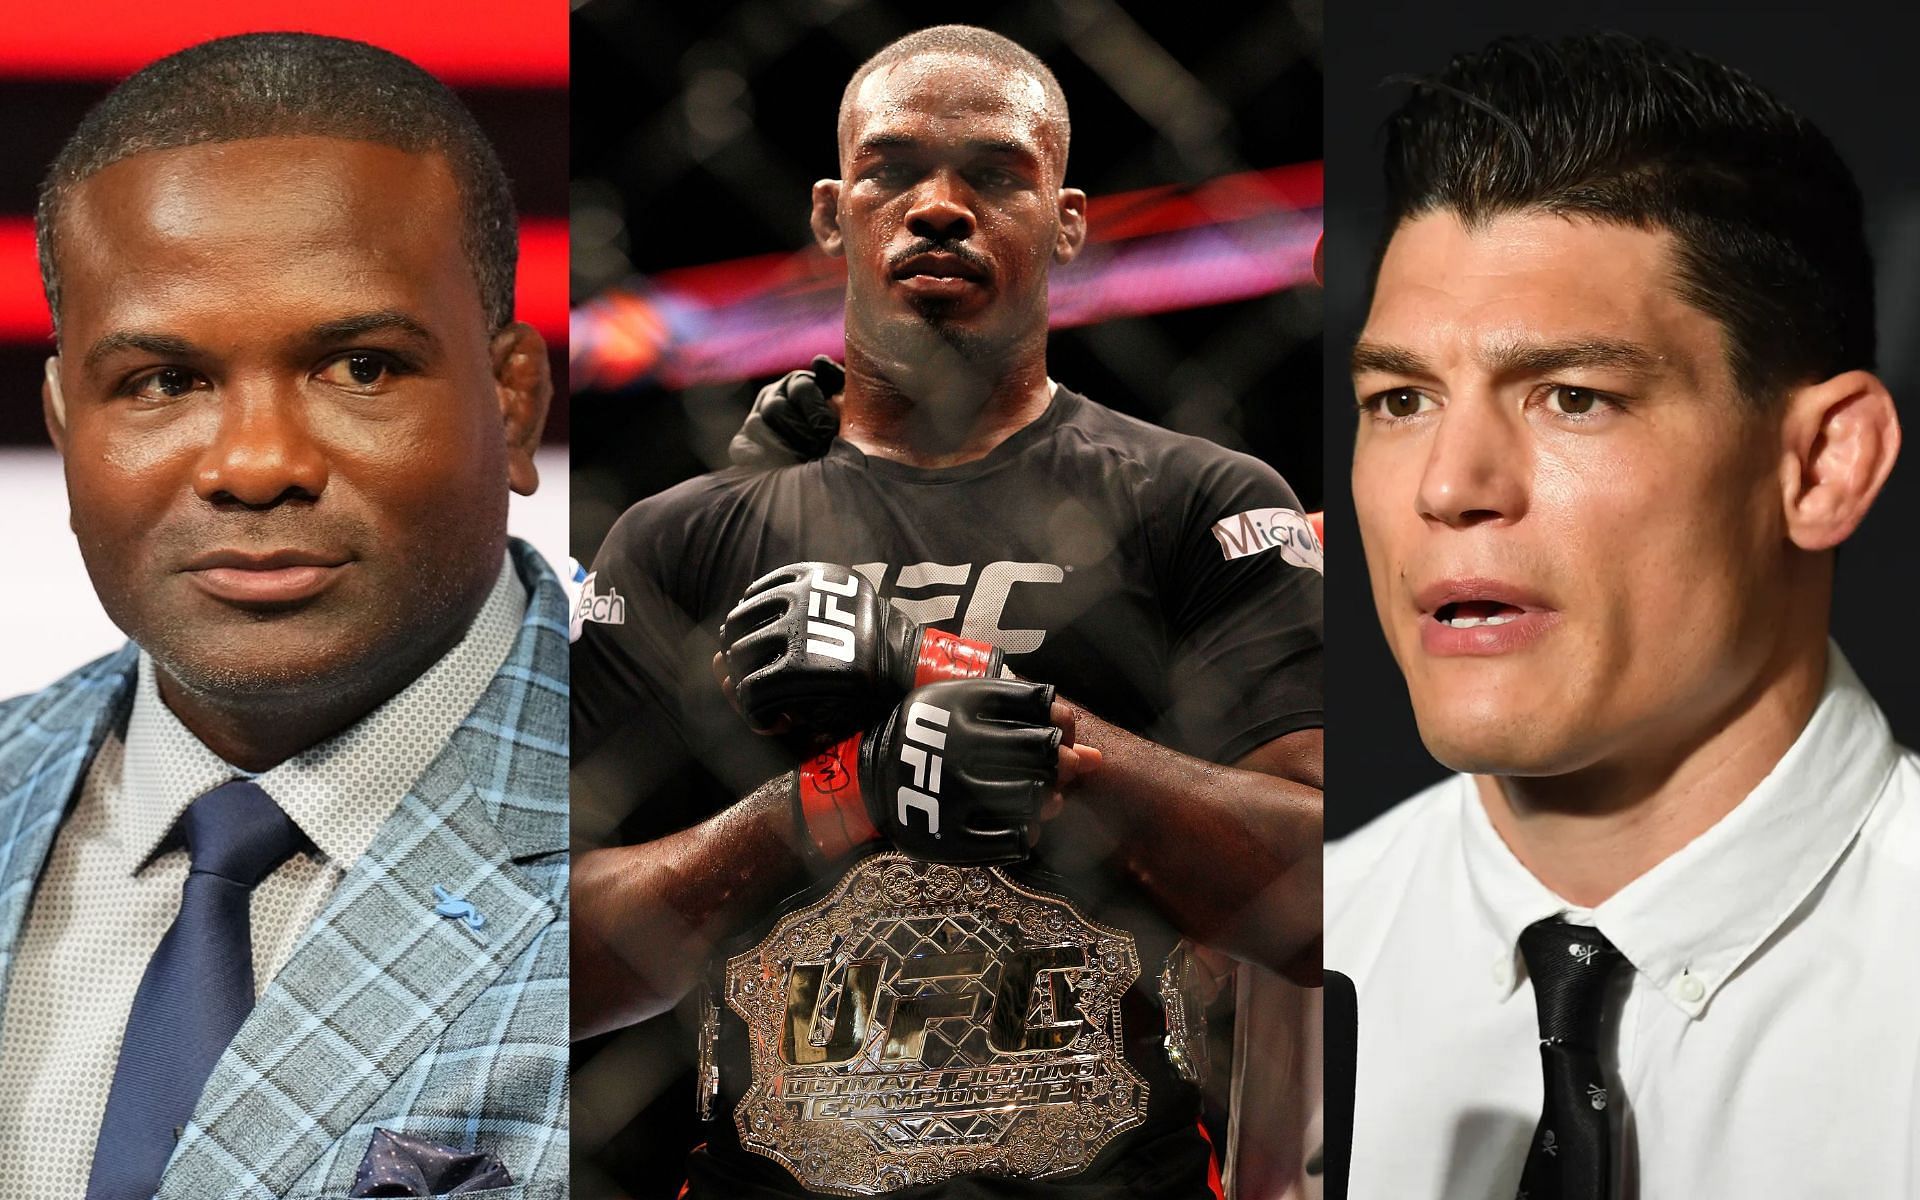 Din Thomas (left), Jon Jones (centre), and Alan Jouban (right). [Images courtesy: left image from Twitter @DinThomas and the rest from Getty Images]